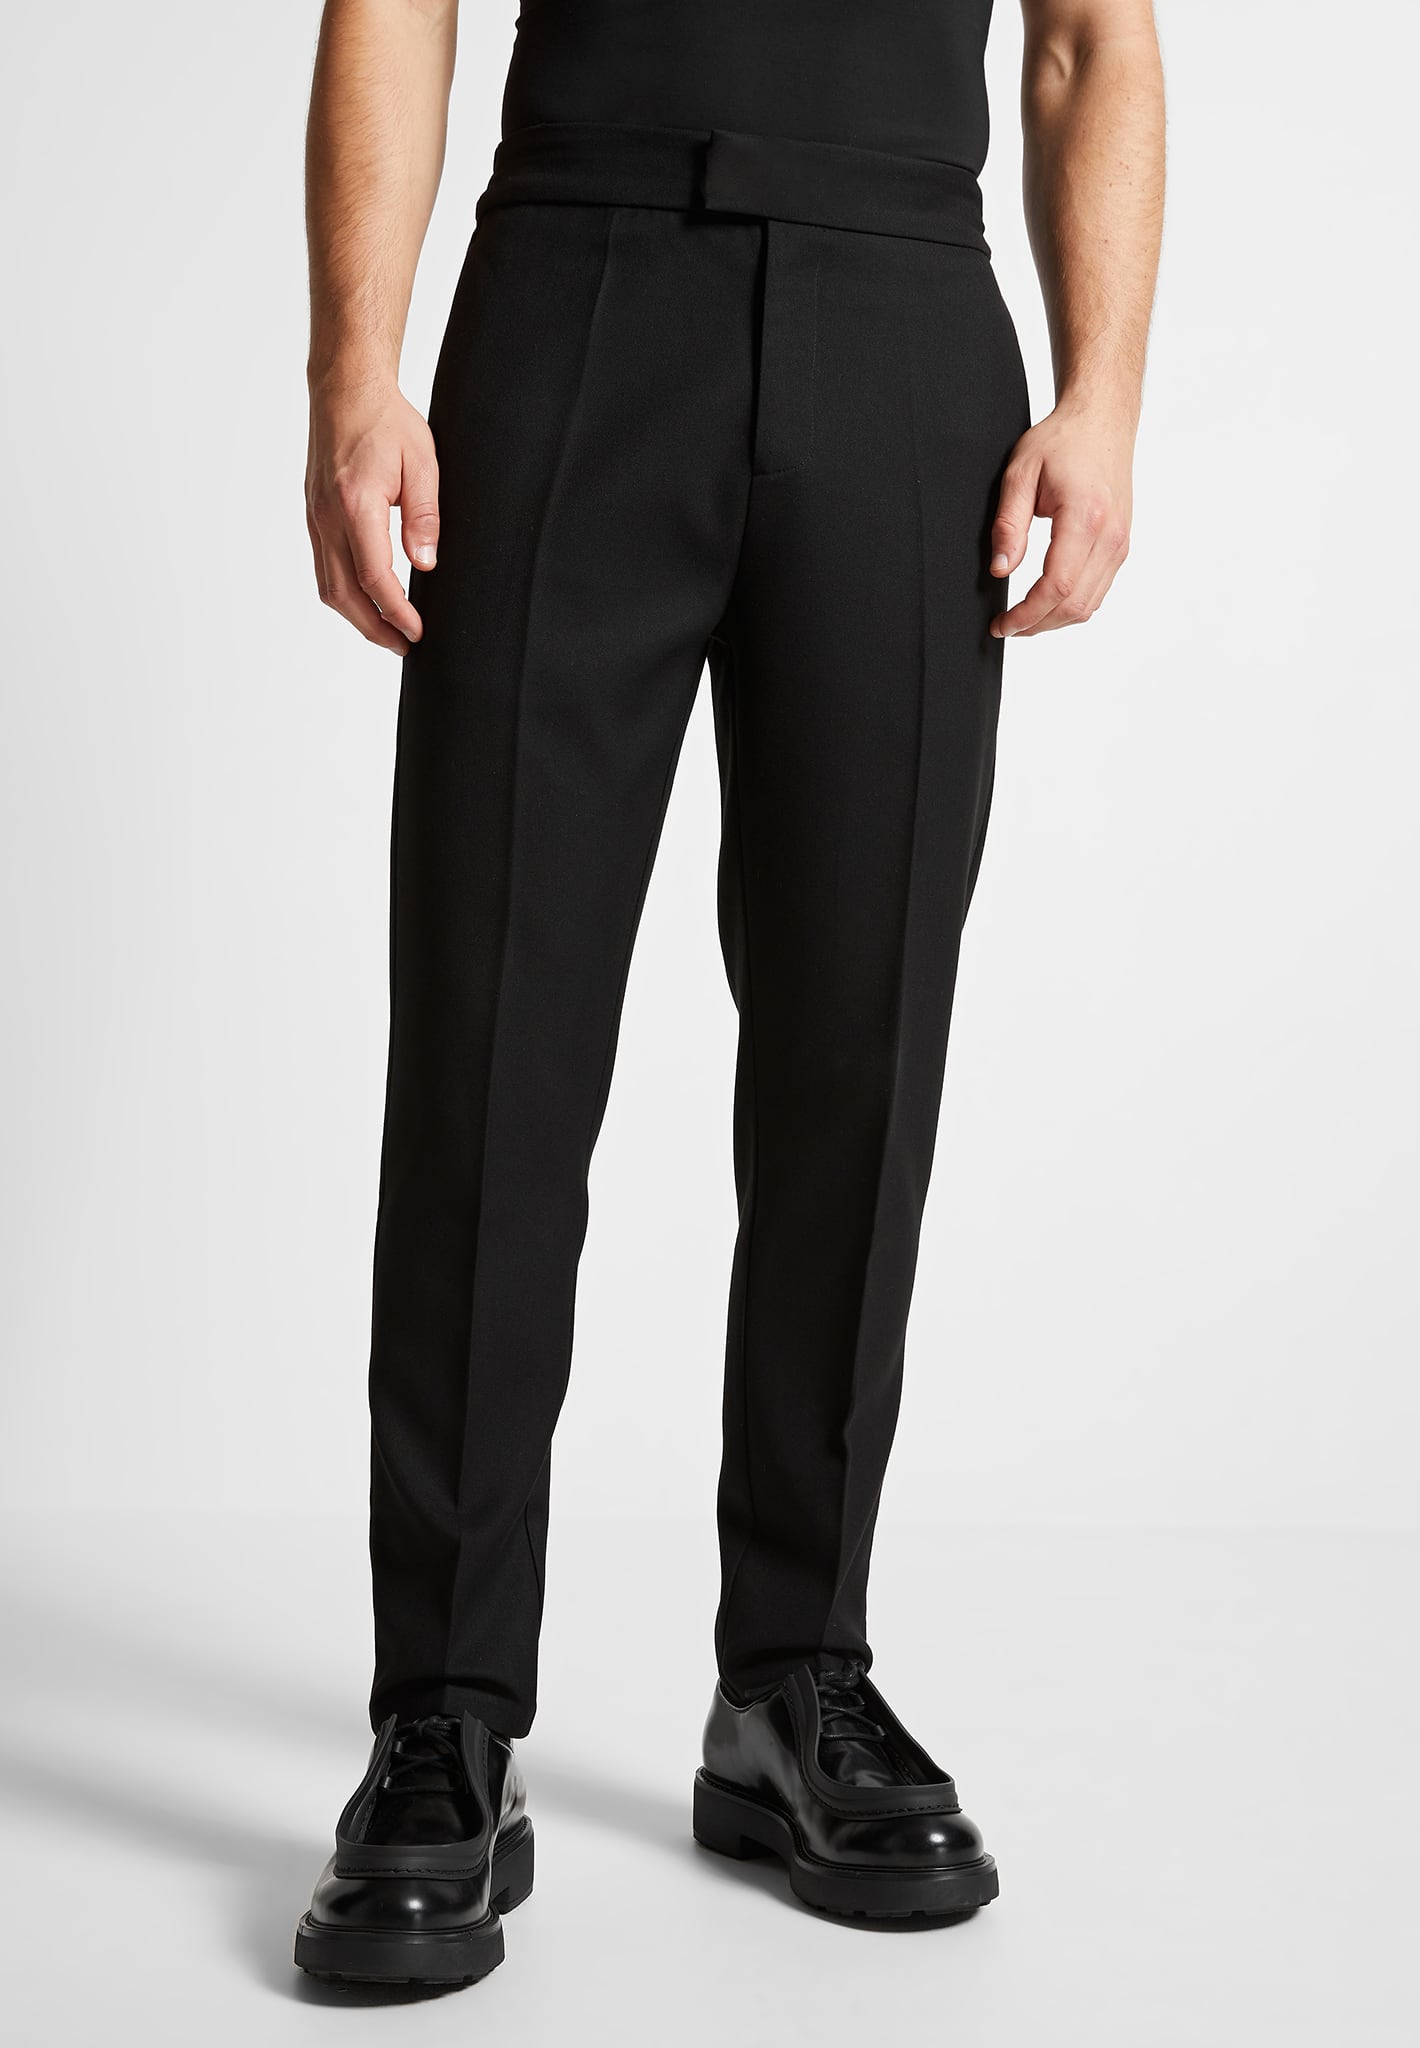 Women's High-rise Tailored Trousers - A New Day™ Black 10 : Target